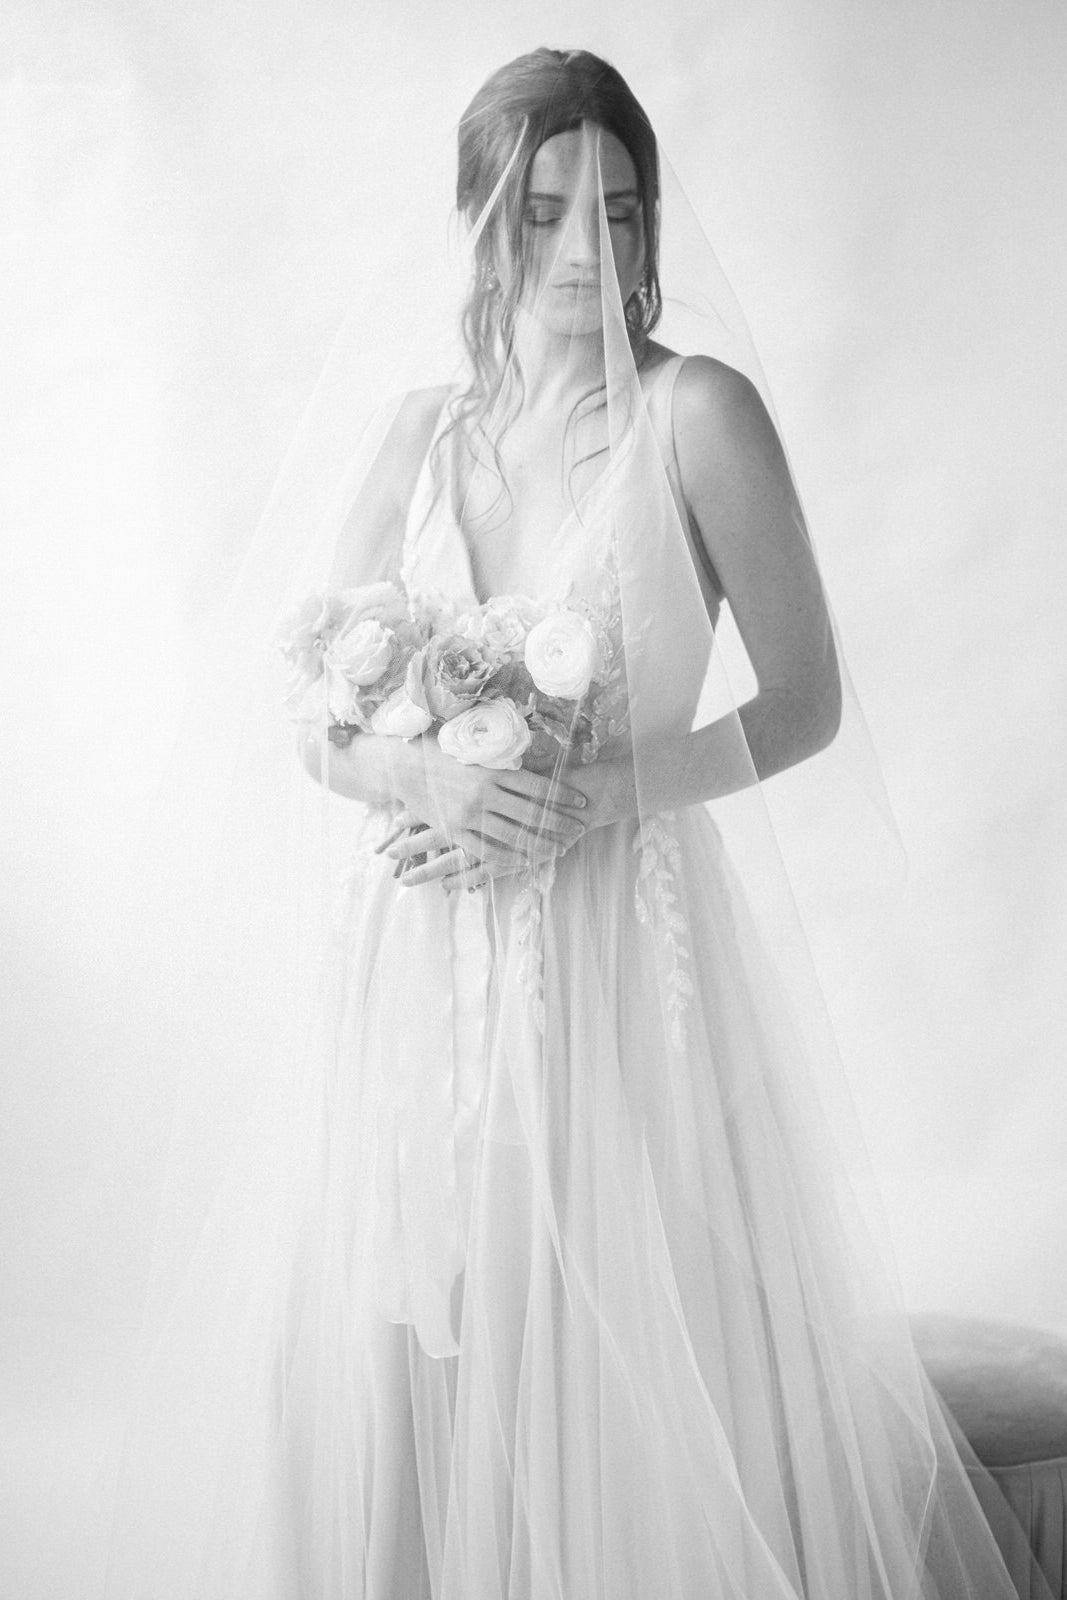 One Blushing Bride Two Tier Drop Wedding Veil, Long Veil with Blusher, Double Layer Nude / Fingertip 35-40 Inches